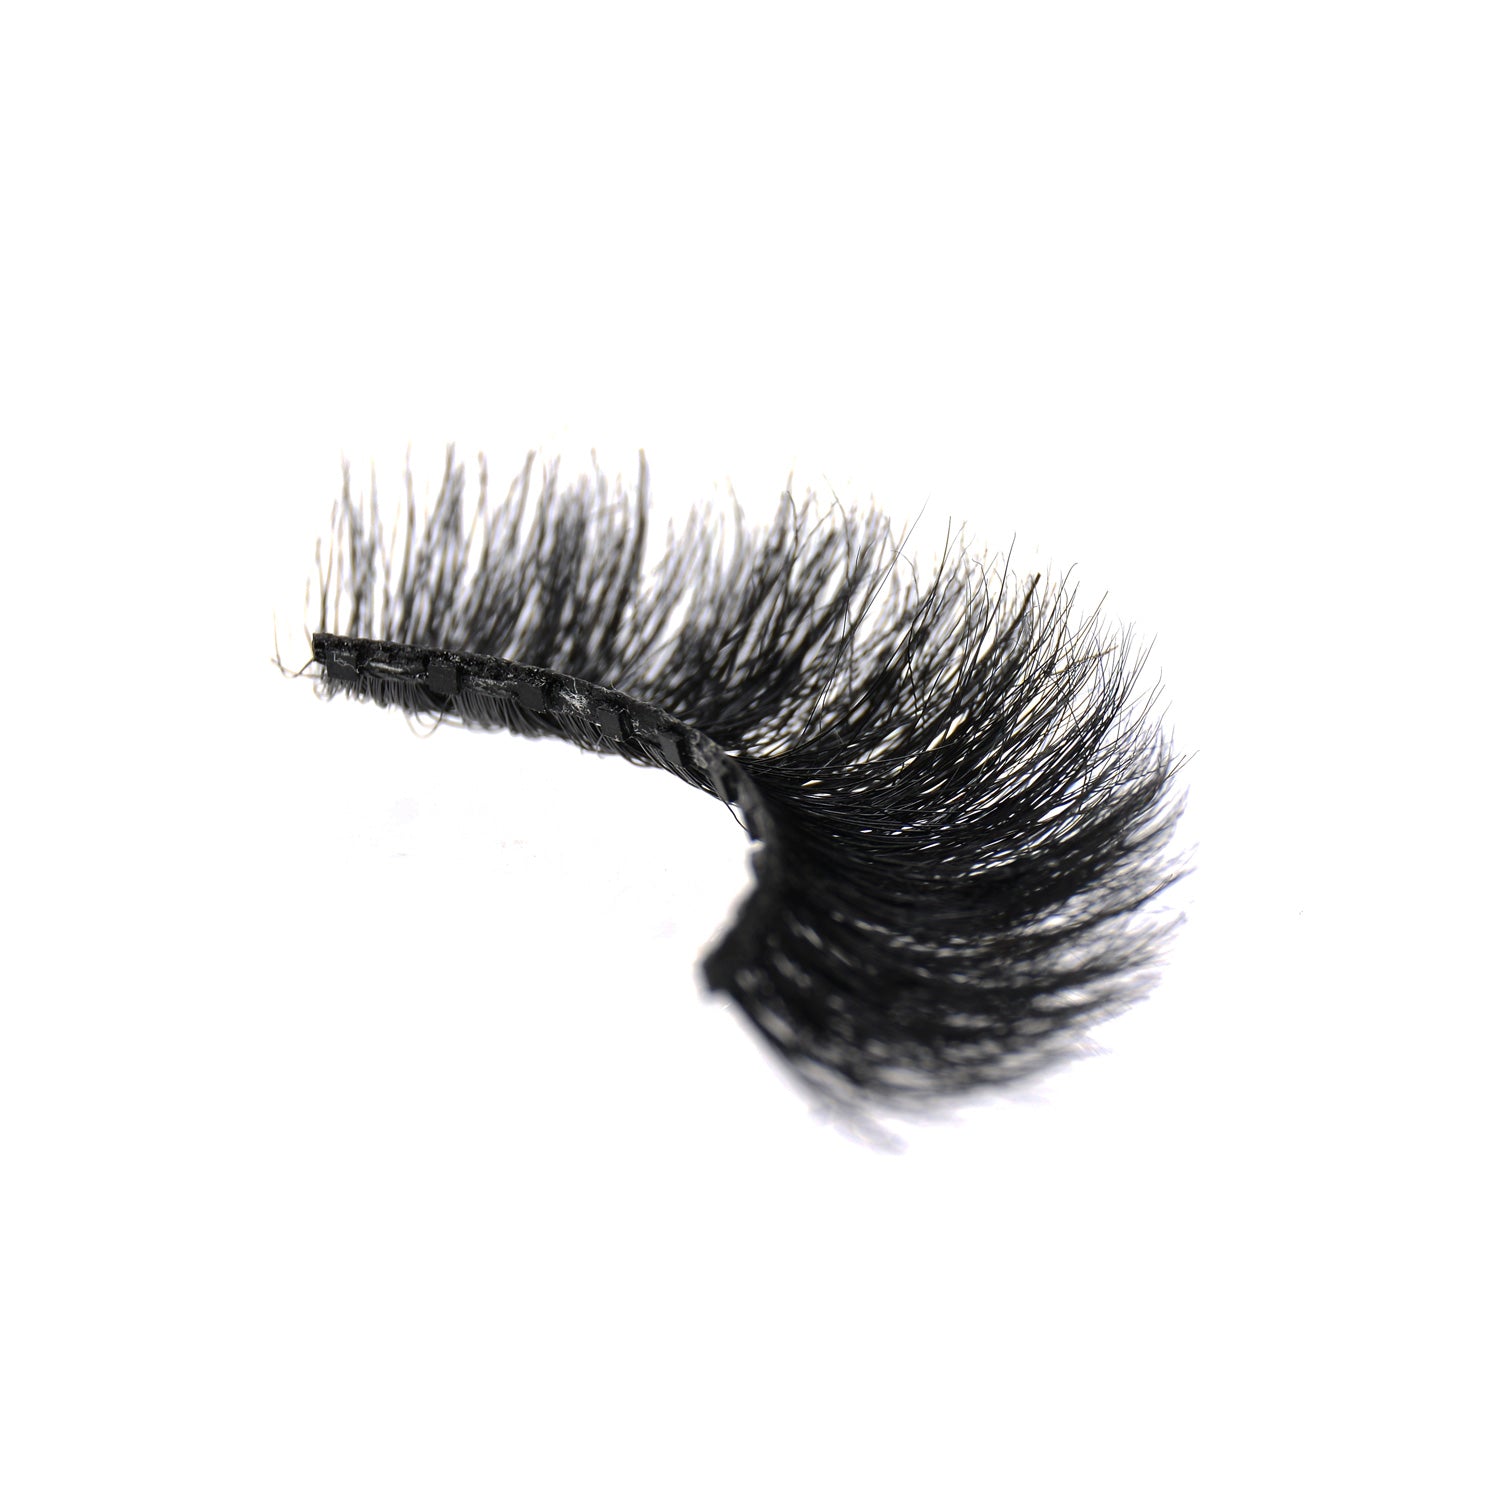 Dolly 3D Mink Lashes Mid - 10 paires